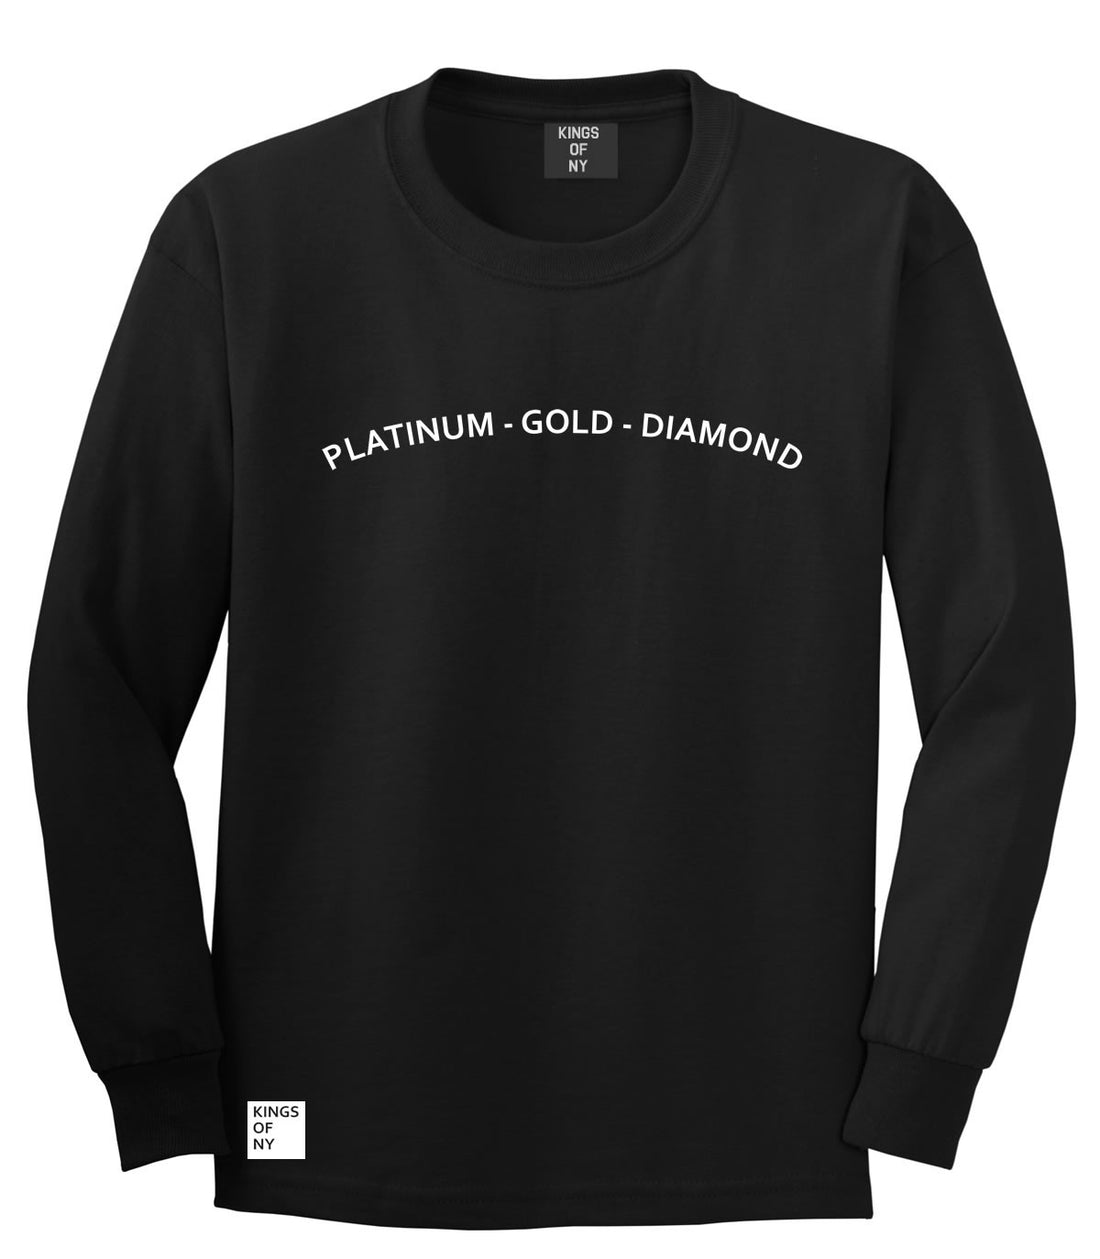 Platinum Gold Diamond Long Sleeve T-Shirt in Black by Kings Of NY